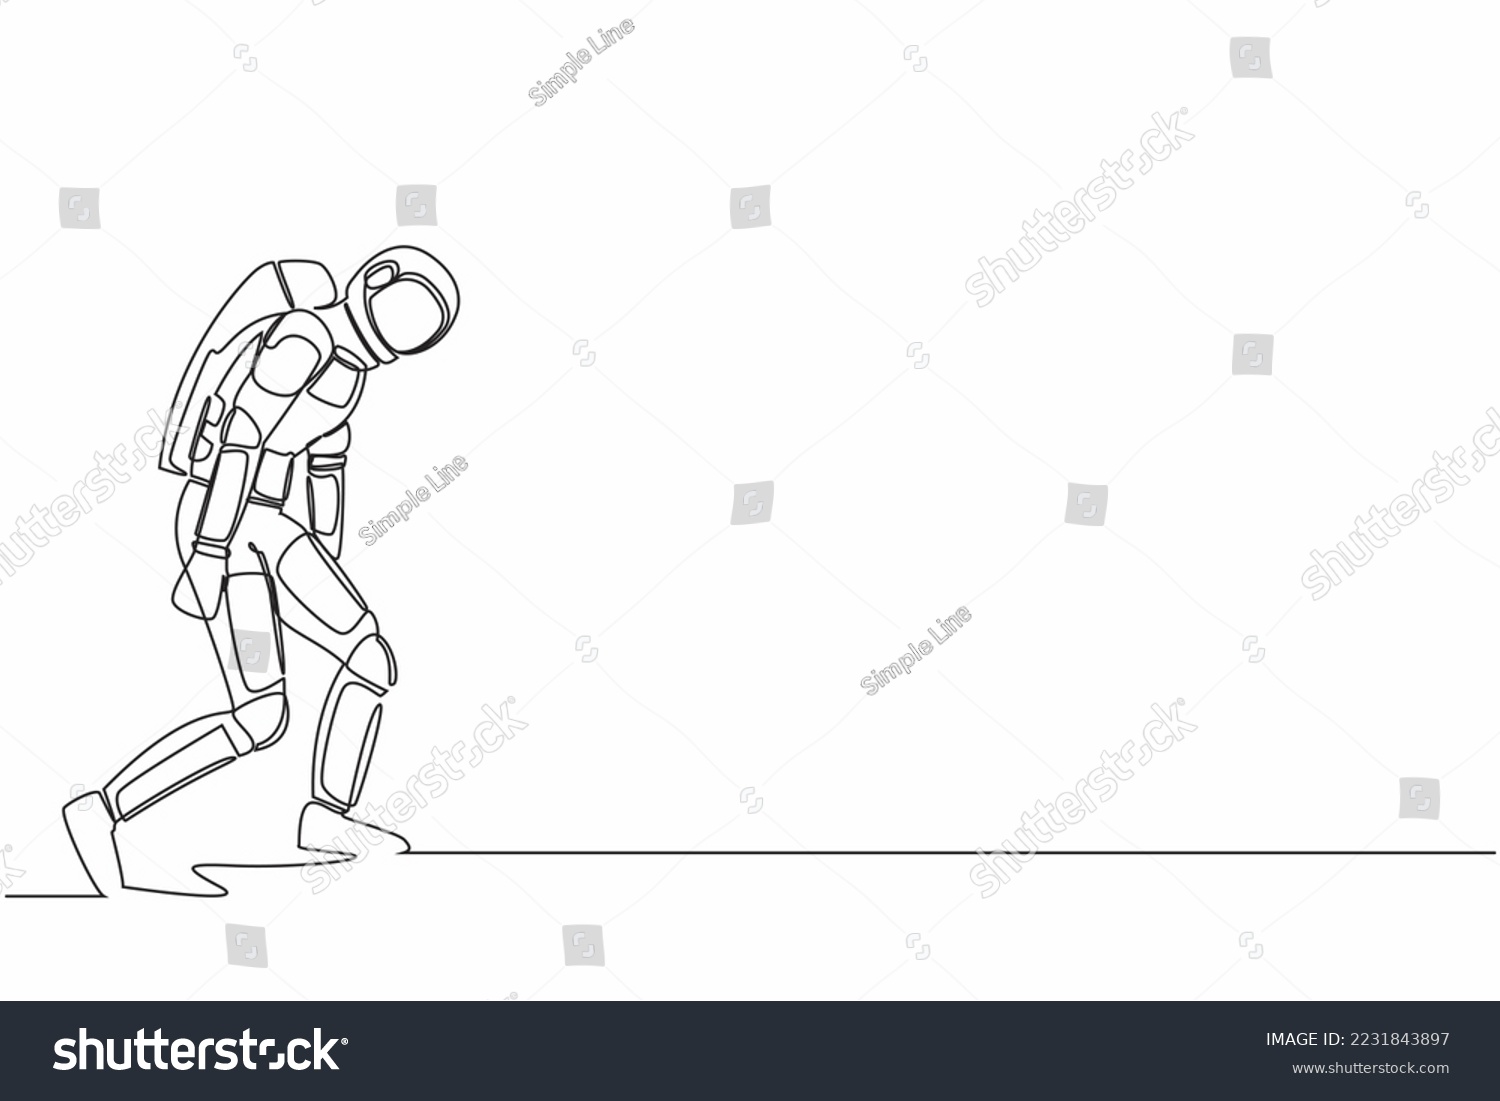 SVG of Continuous one line drawing sadness young astronaut bowed down. Having mental pressure or stress after spacecraft expedition. Cosmonaut outer space. Single line draw graphic design vector illustration svg